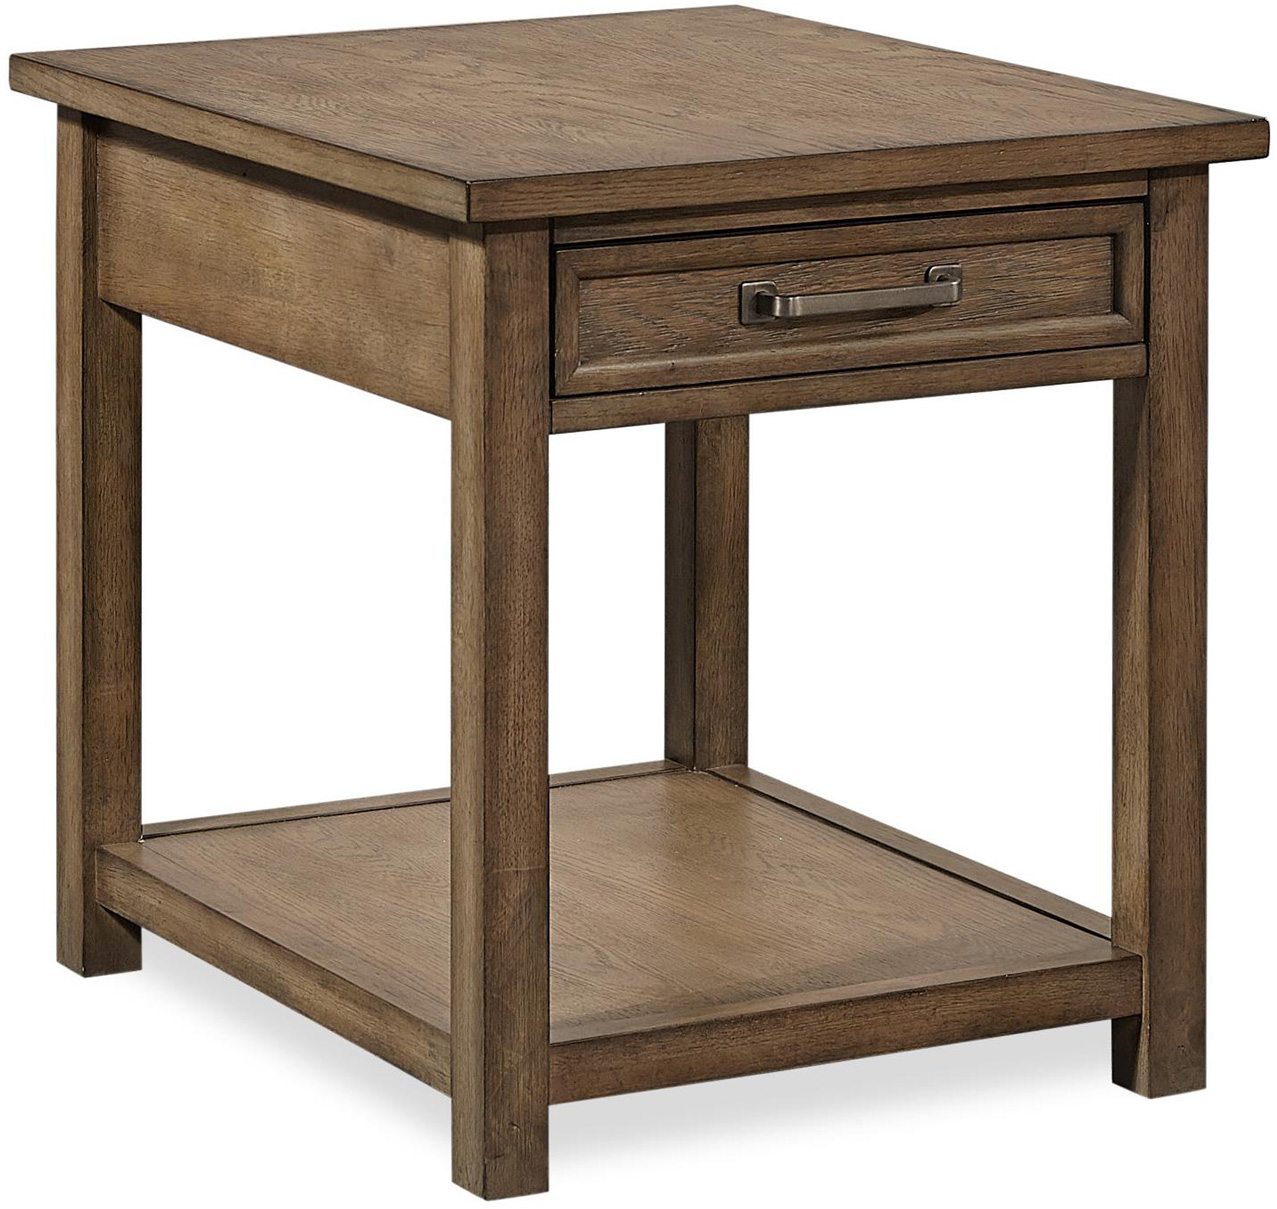 Terrace Point End Table in the Tawny finish